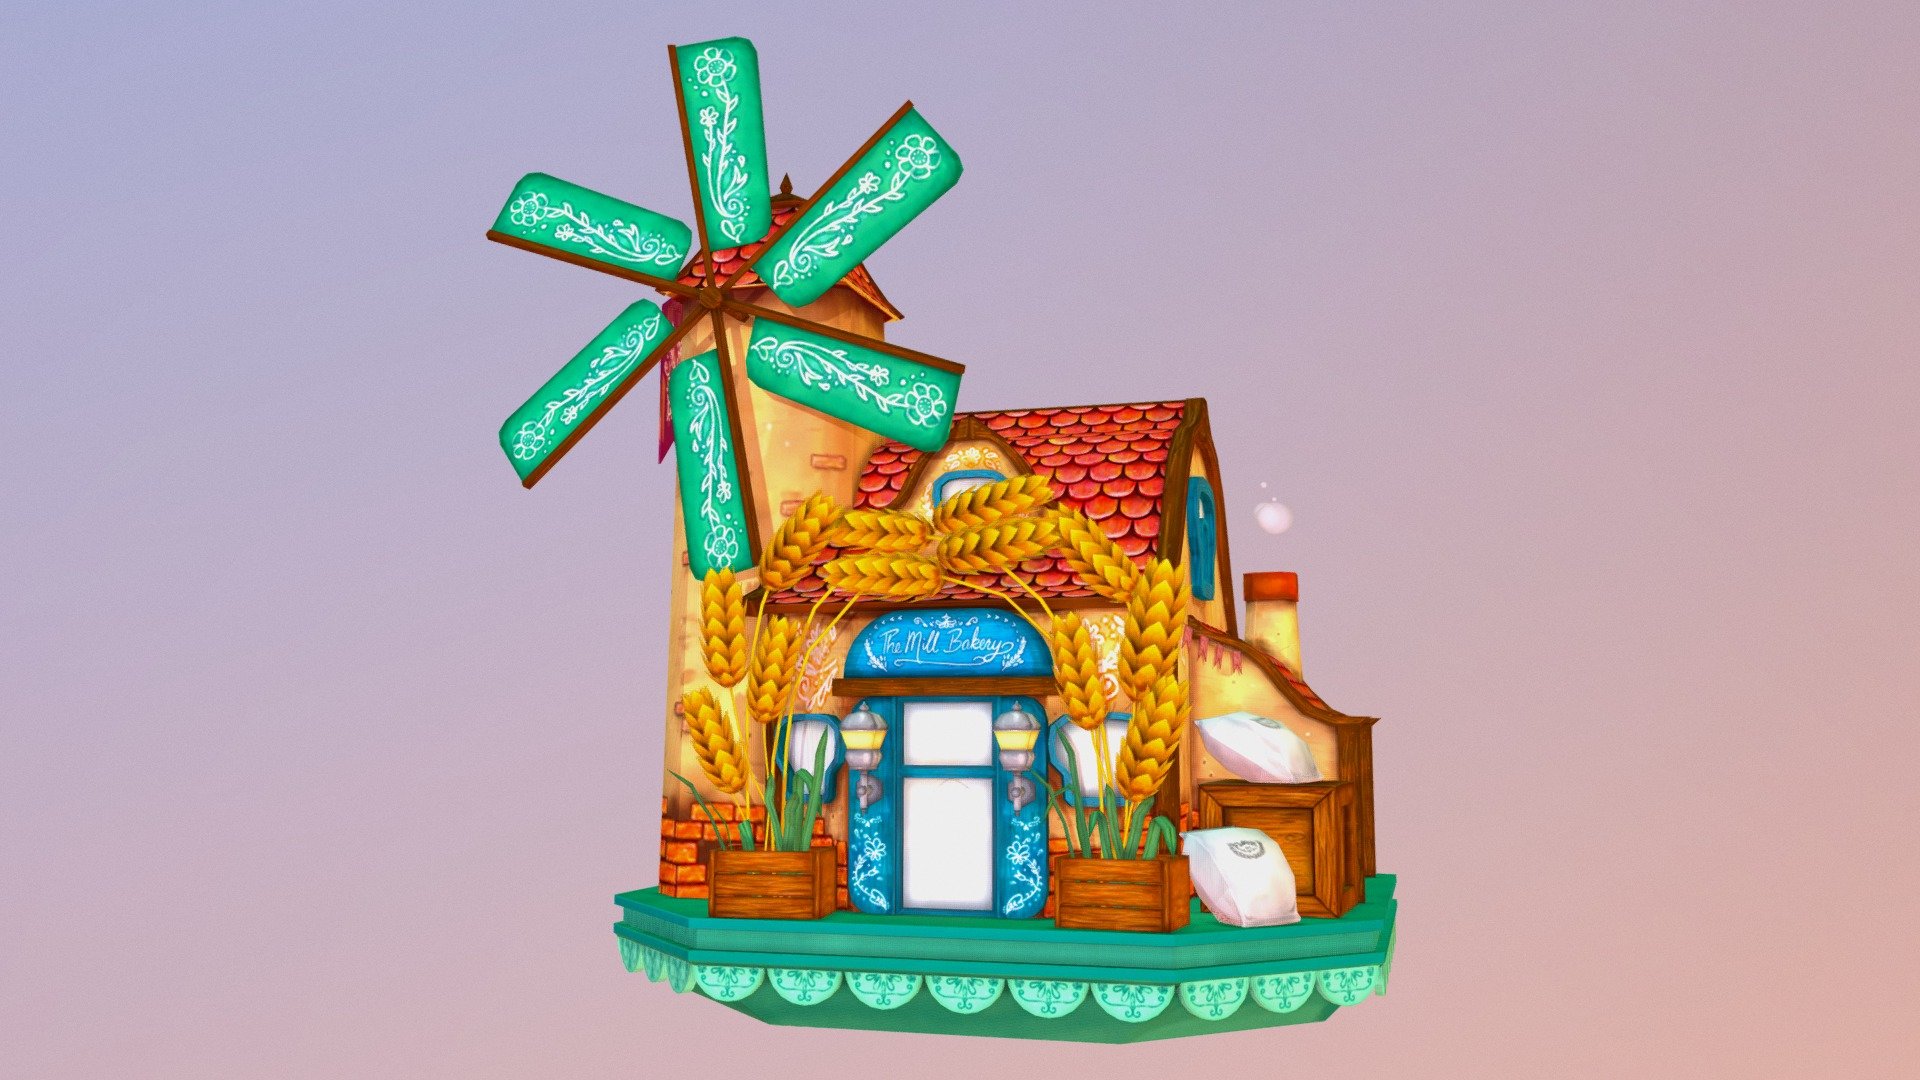 I wanted to work on a fun diorama, so I picked a bakery, because they’re such warm happy places and who doesn’t love freshly baked goods! I wanted to focus primarily on hand painted texturing and picked a stylised cartoon-ish style with bright colours. I also took inspiration from European cuckoo clocks and the patterns they use in their designs 3d model